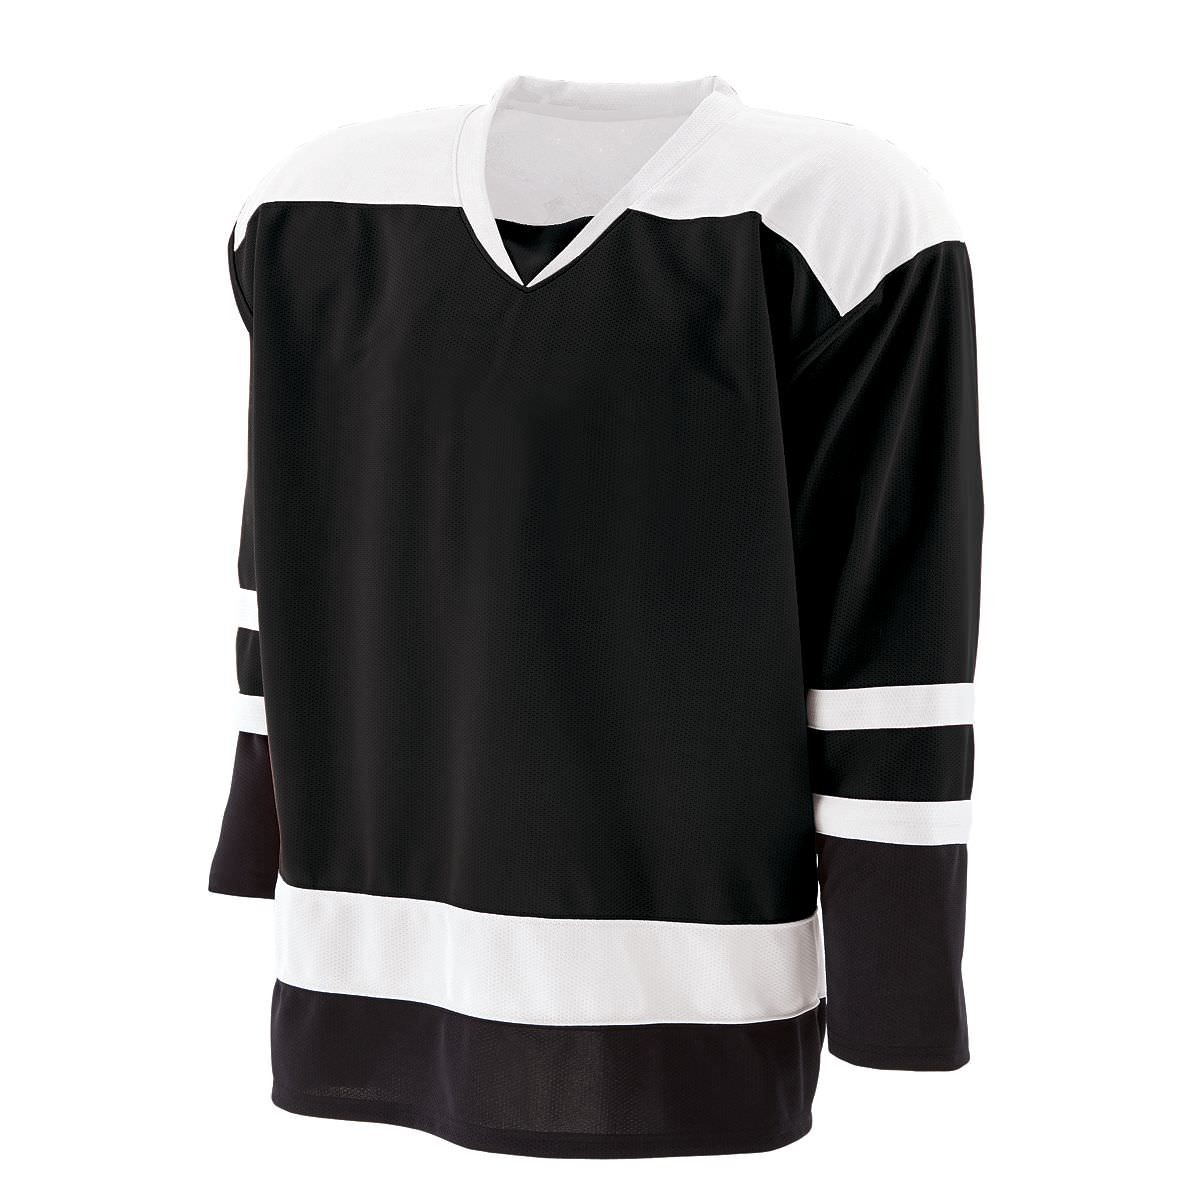 Monkeysports Los Angeles Kings Uncrested Adult Hockey Jersey in Black/White Size XX-Large